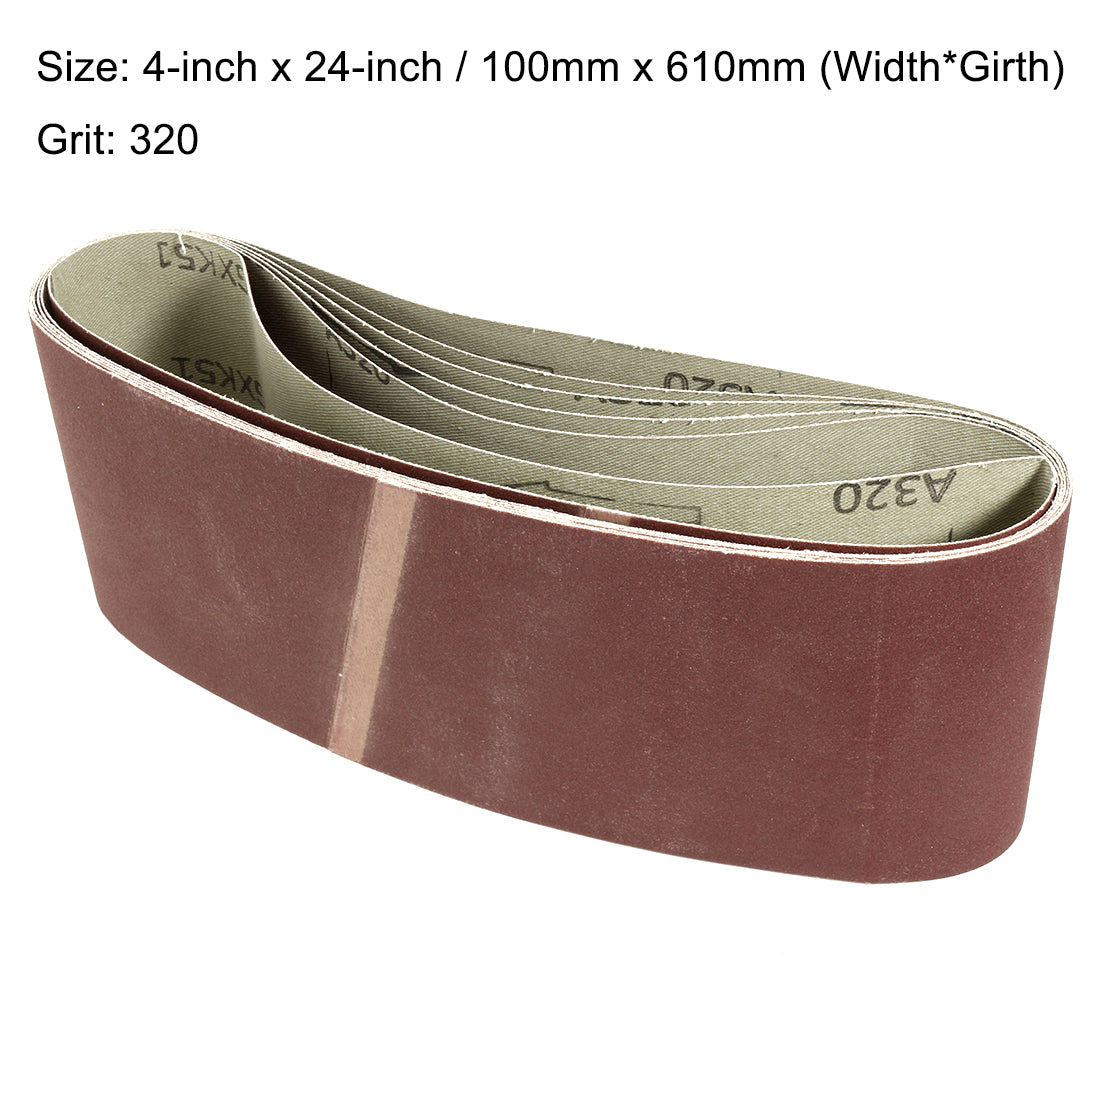 uxcell Uxcell 4-Inch x 24-Inch Aluminum Oxide Sanding Belt 320 Grits Lapped Joint 6pcs